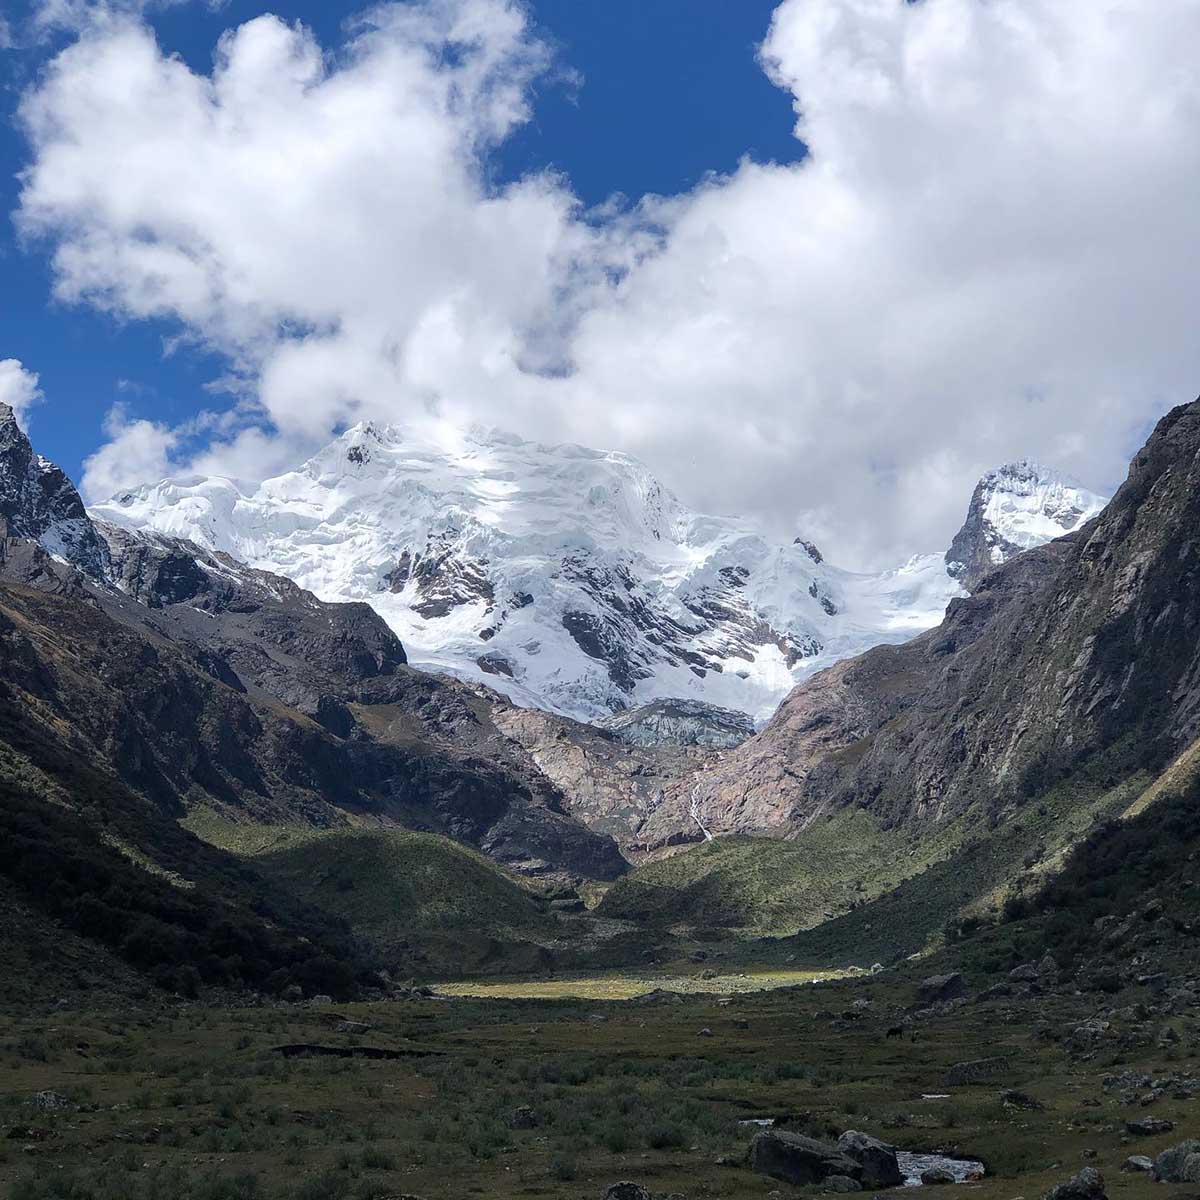 Clouds partially cover snowcapped mountains in huascaran national park, Peru.